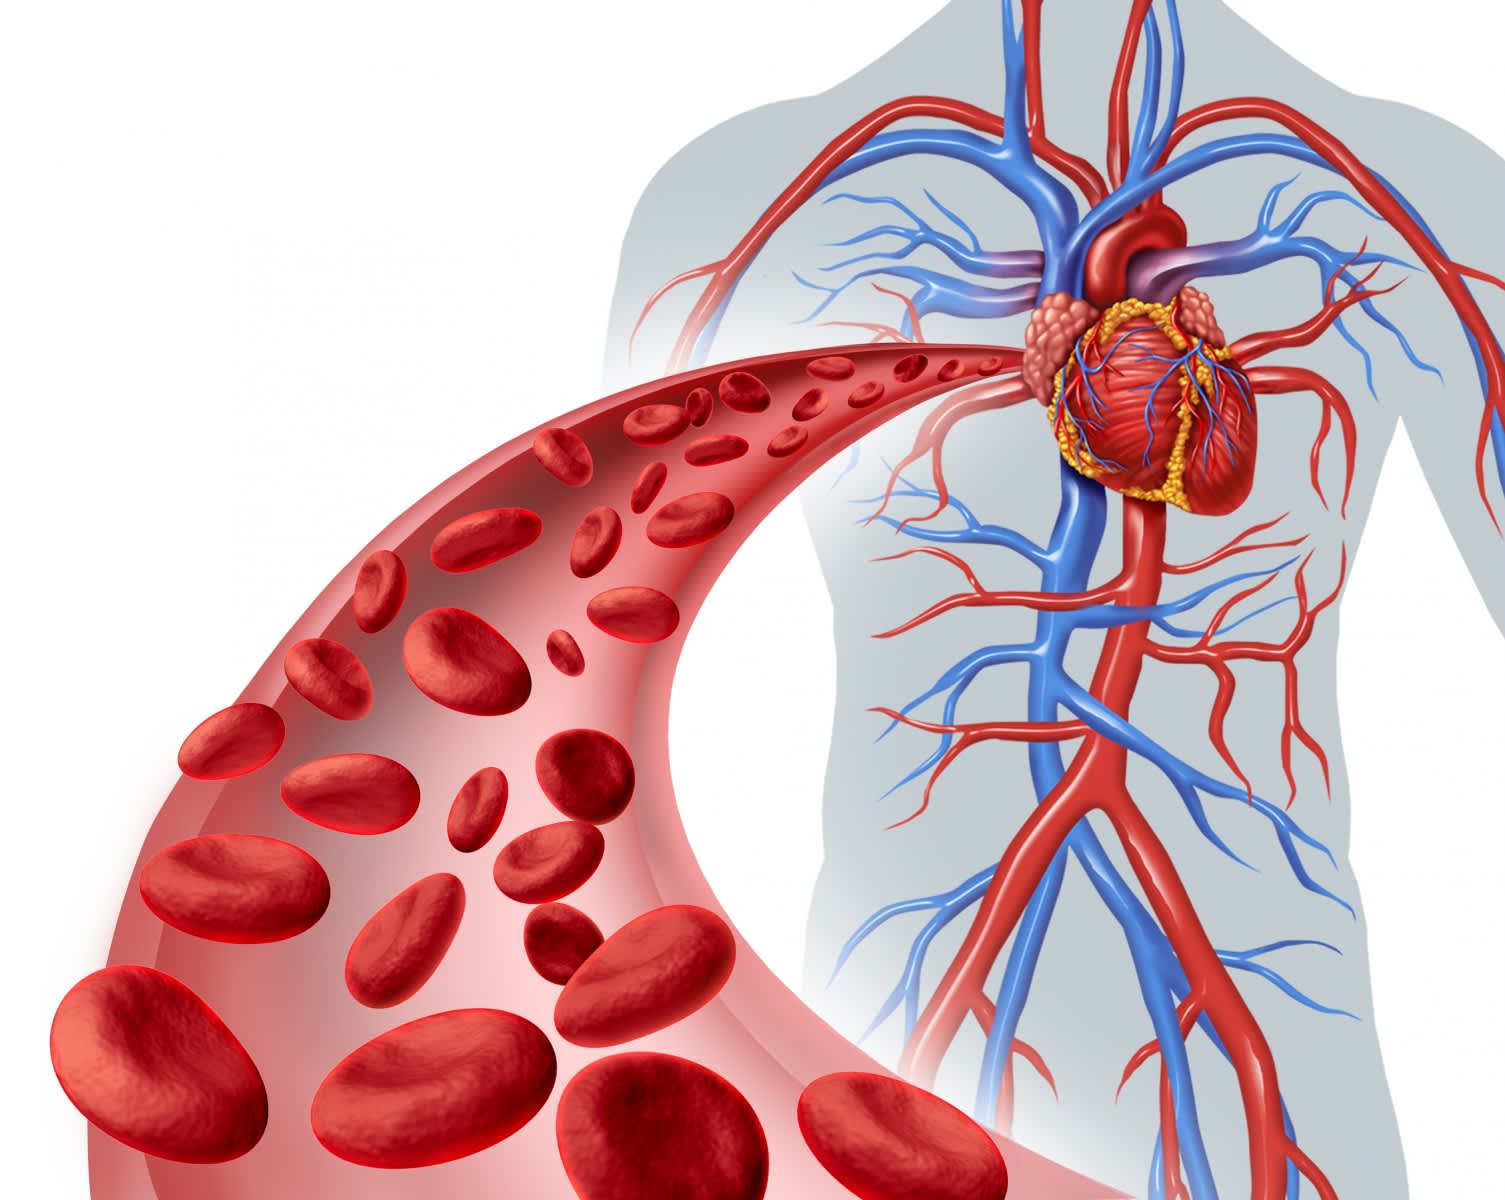 The image shows the structure of the heart and its associated blood vessels, as well as a healthy blood vessel in which red blood cells transport oxygen to the heart.